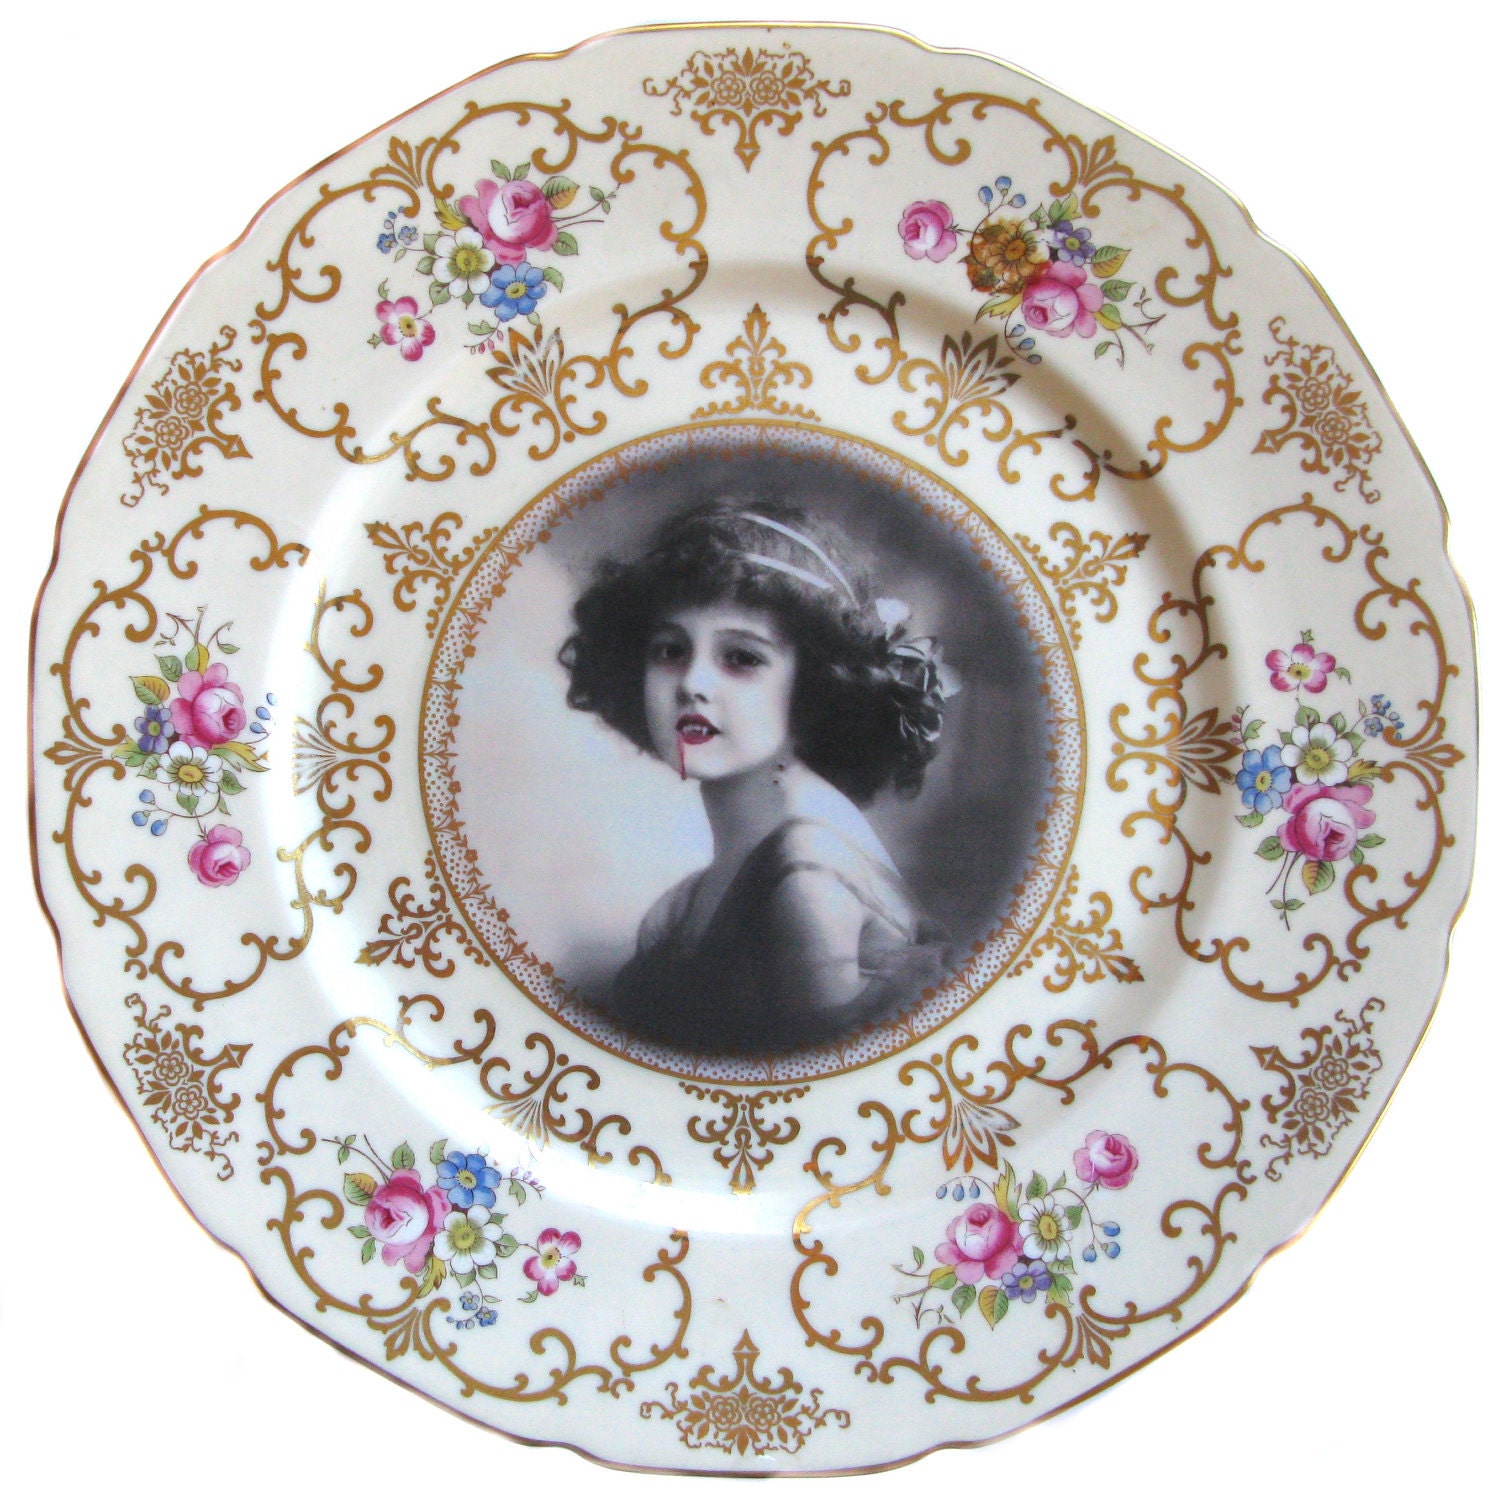 Lilith the Vampire Girl Portrait - Altered Vintage Plate